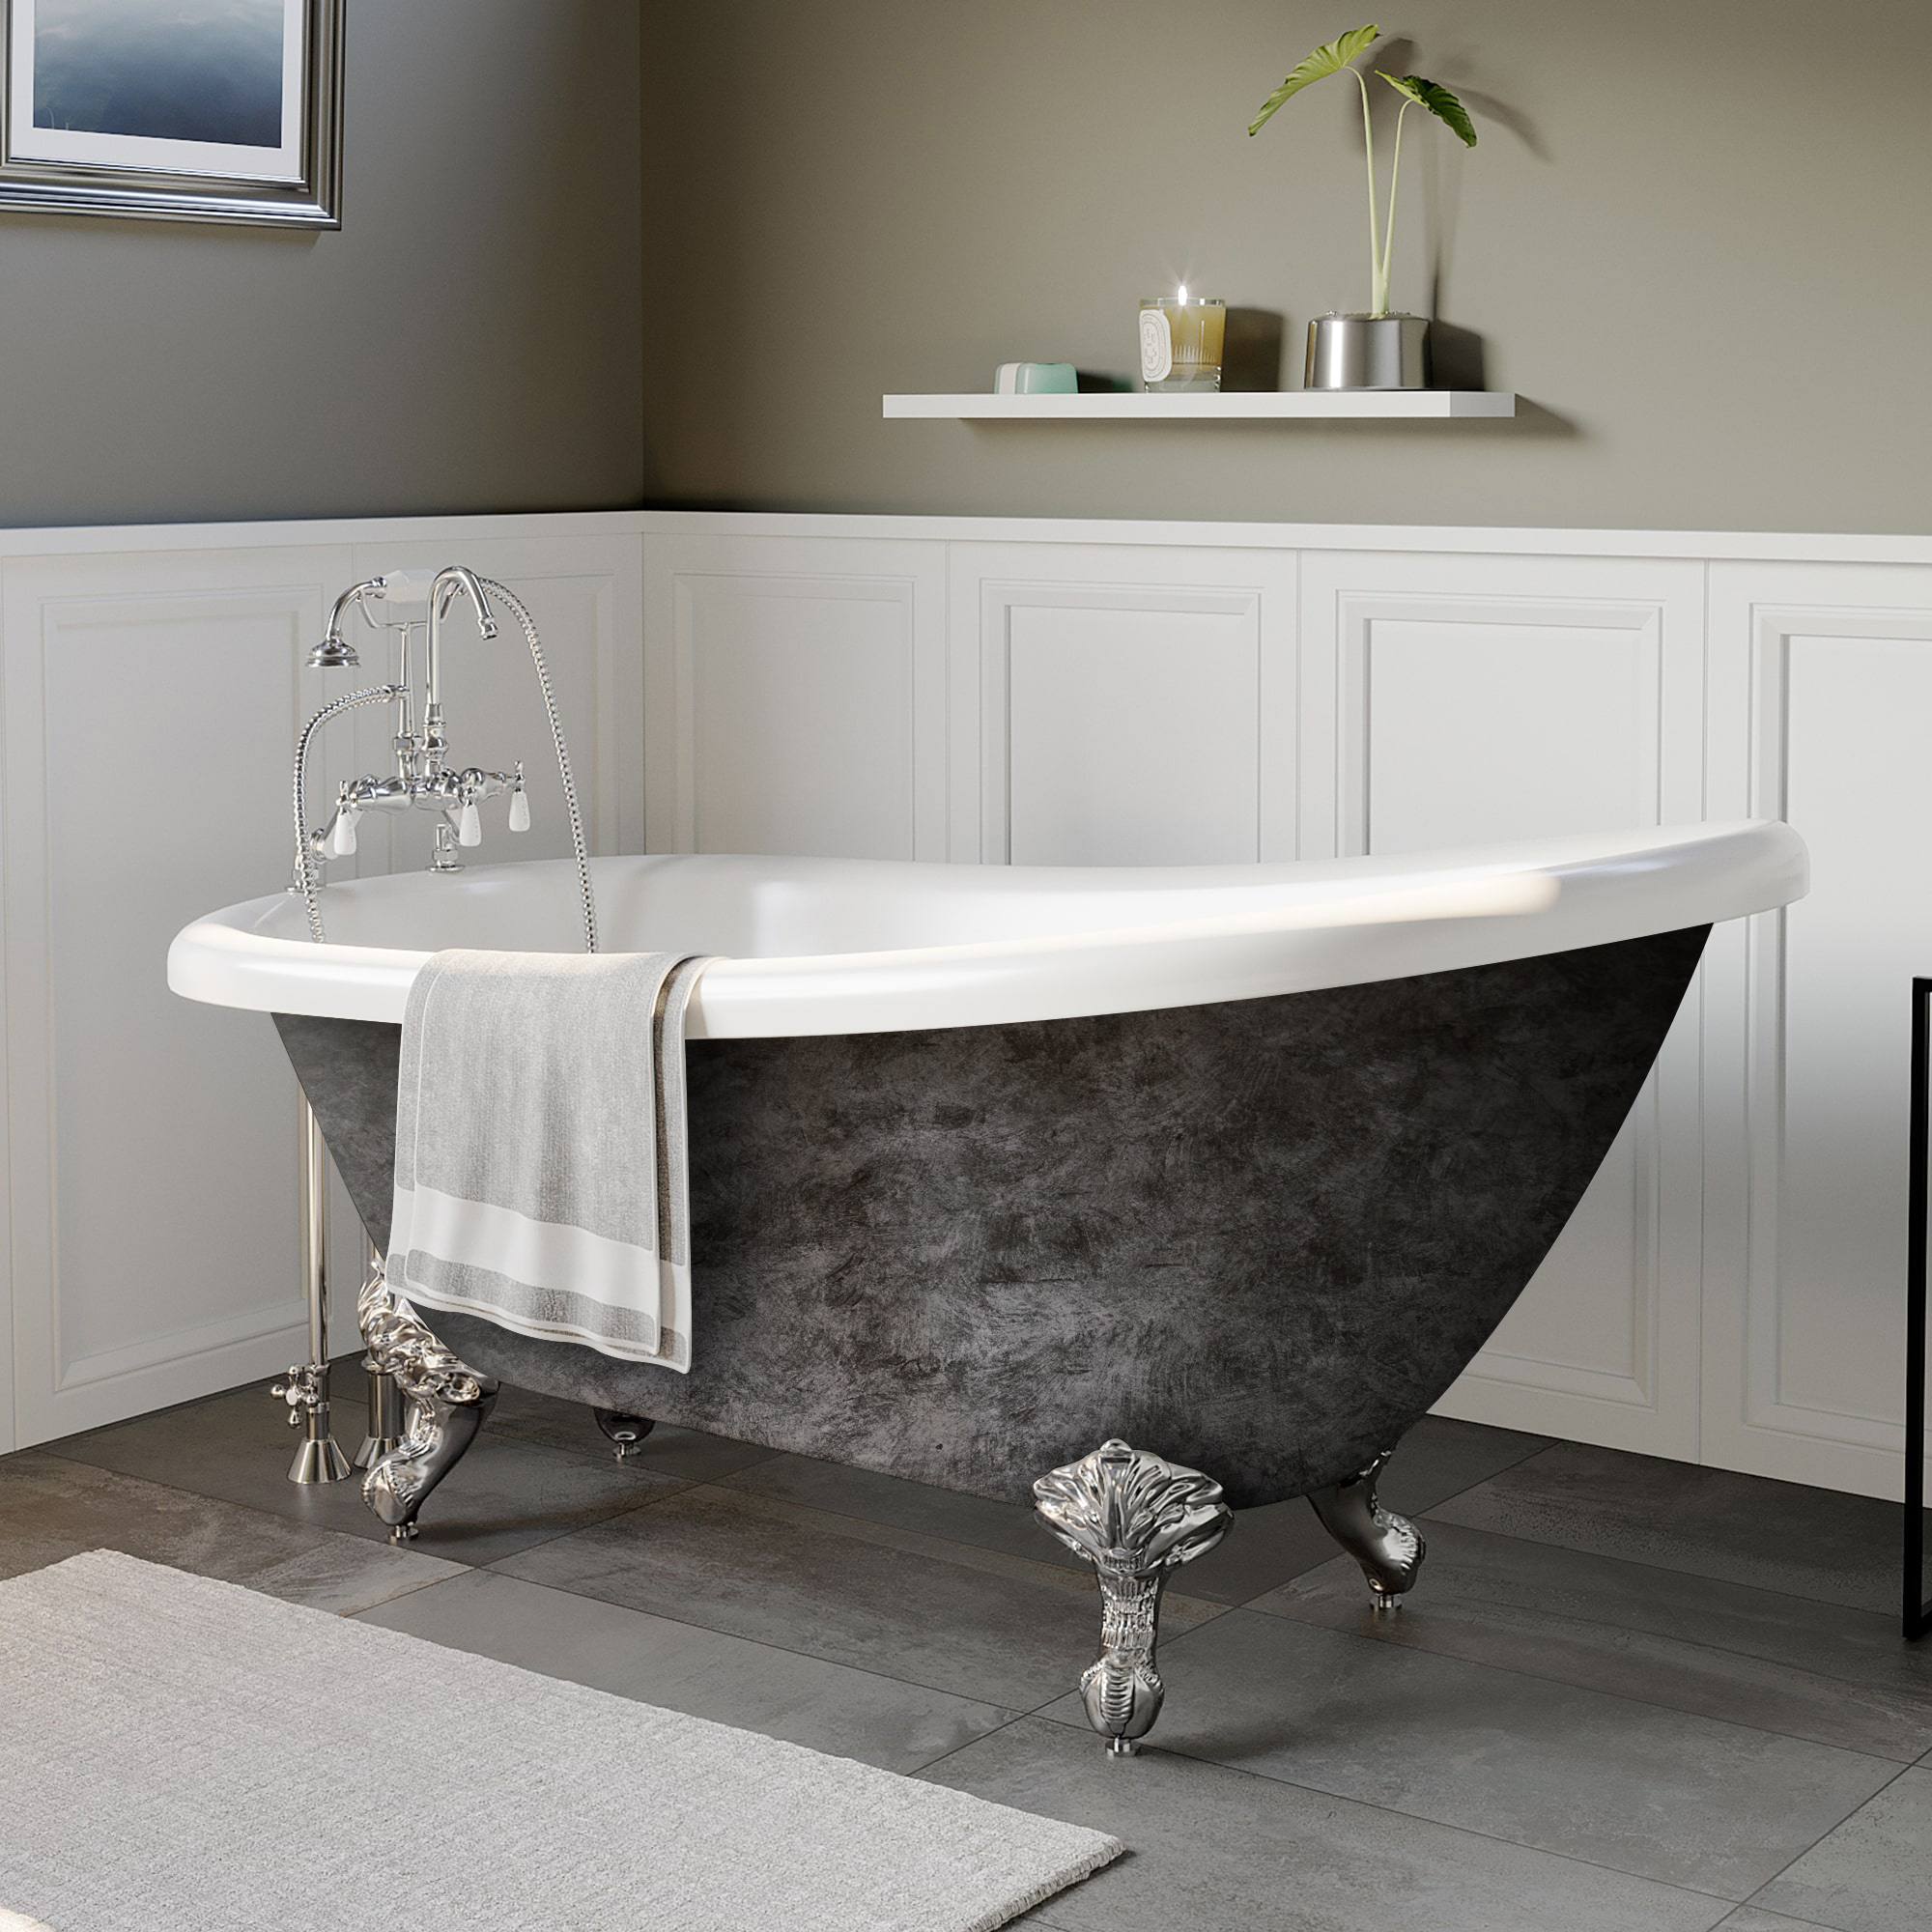 Cambridge Scorched Platinum 67" x 28" Acrylic Slipper Bathtub with  "7" Deck Mount Faucet Holes and Polished Chrome Ball and Claw Feet